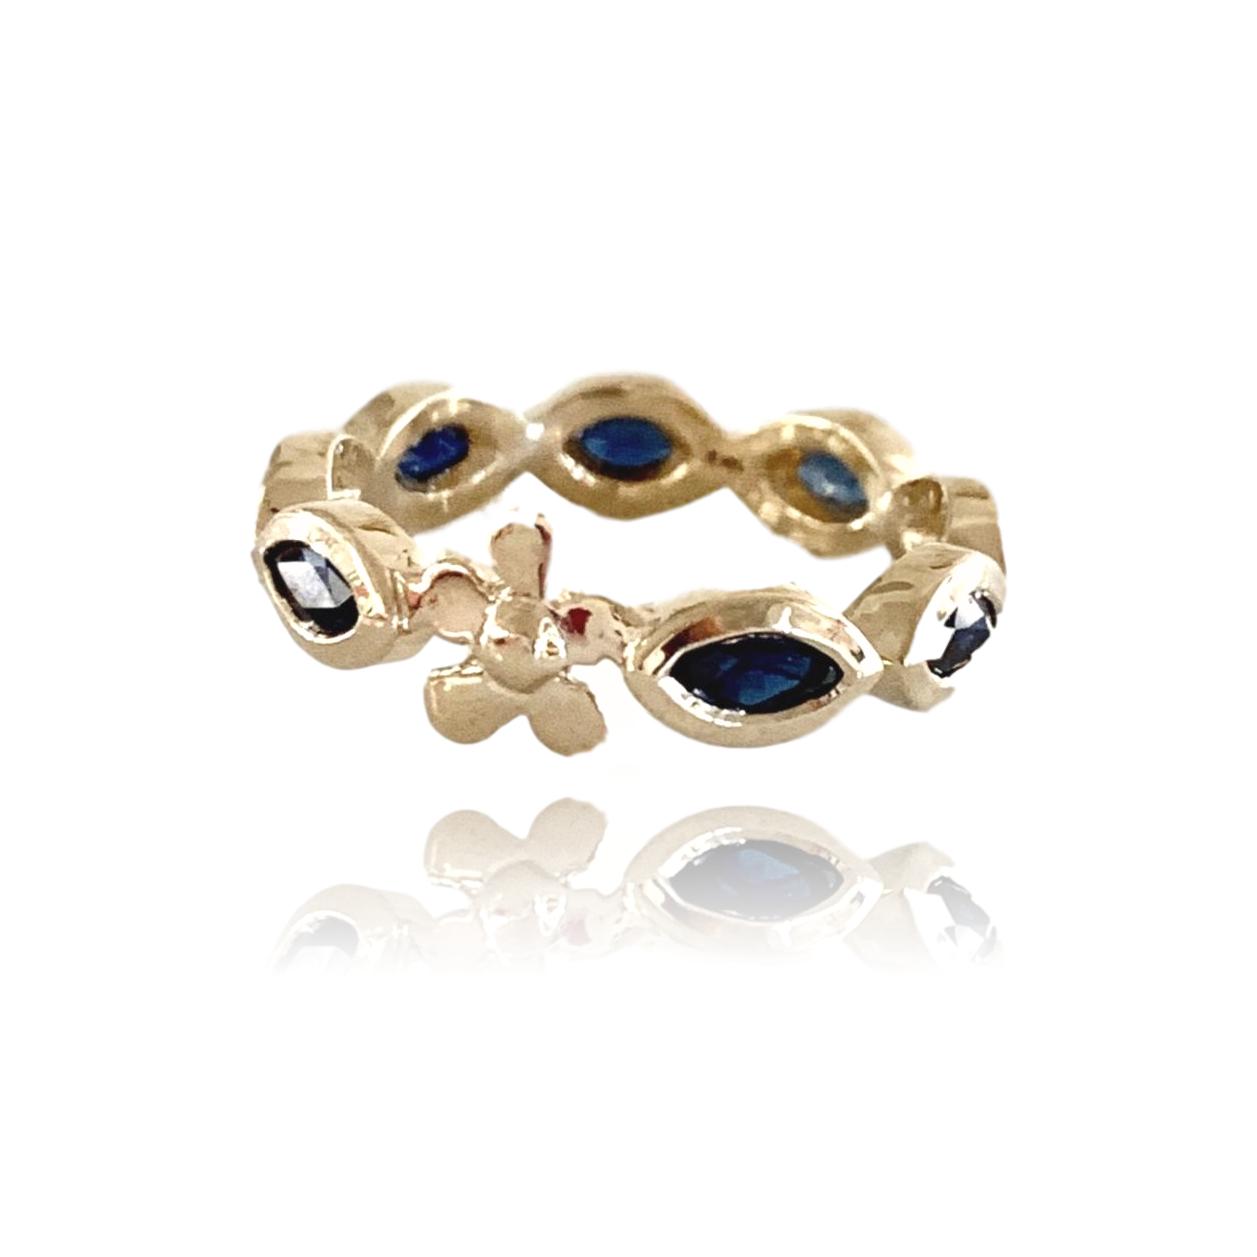 Lavender Anniversary Band with Blue Sapphires - Lauren Sigman Collection